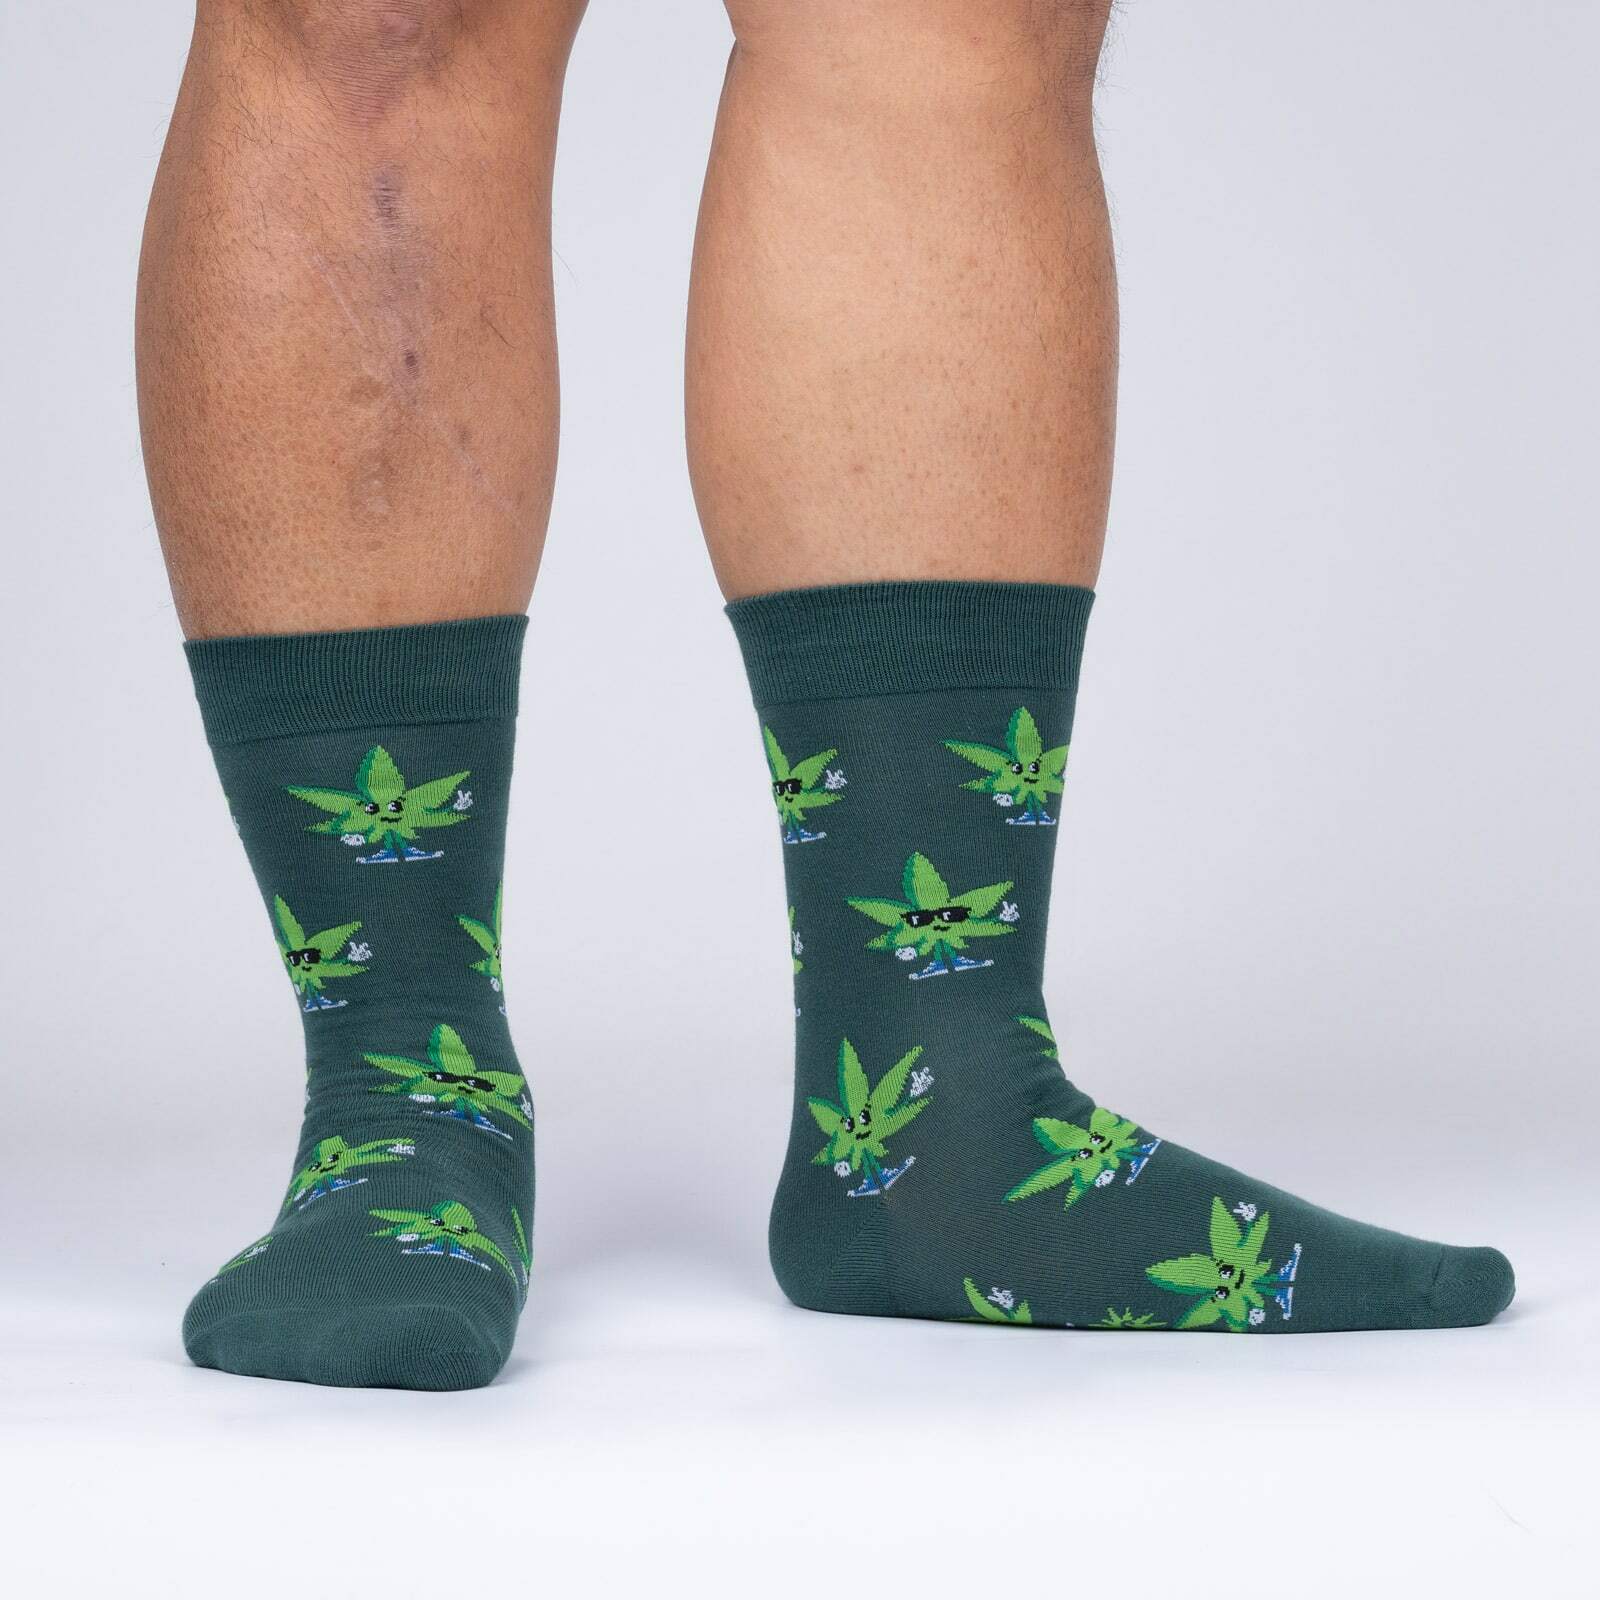 Sock It To Me Peace Out men's sock featuring green sock with cannabis leaves worn by model shown from side